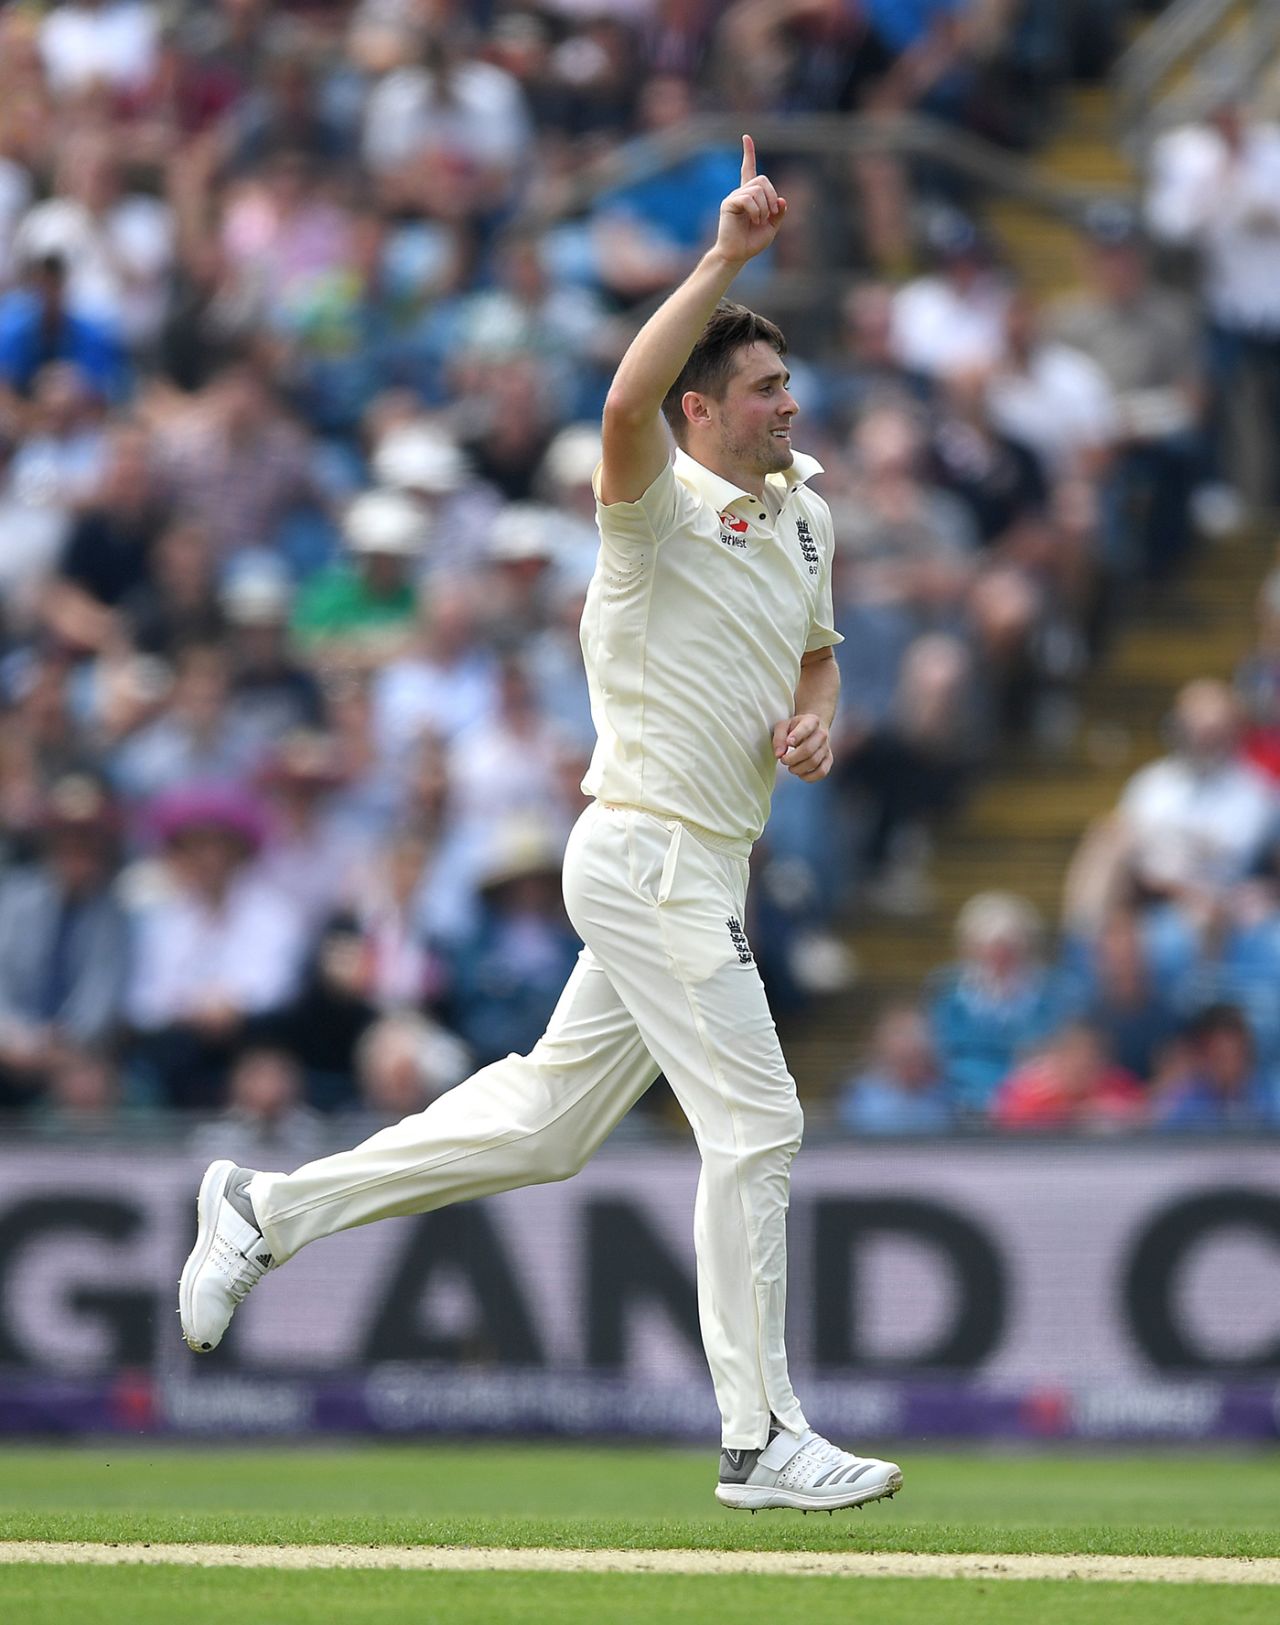 Chris Woakes made inroads on his return to the Test side, England v Pakistan, 2nd Test, Headingley, June 1, 2018